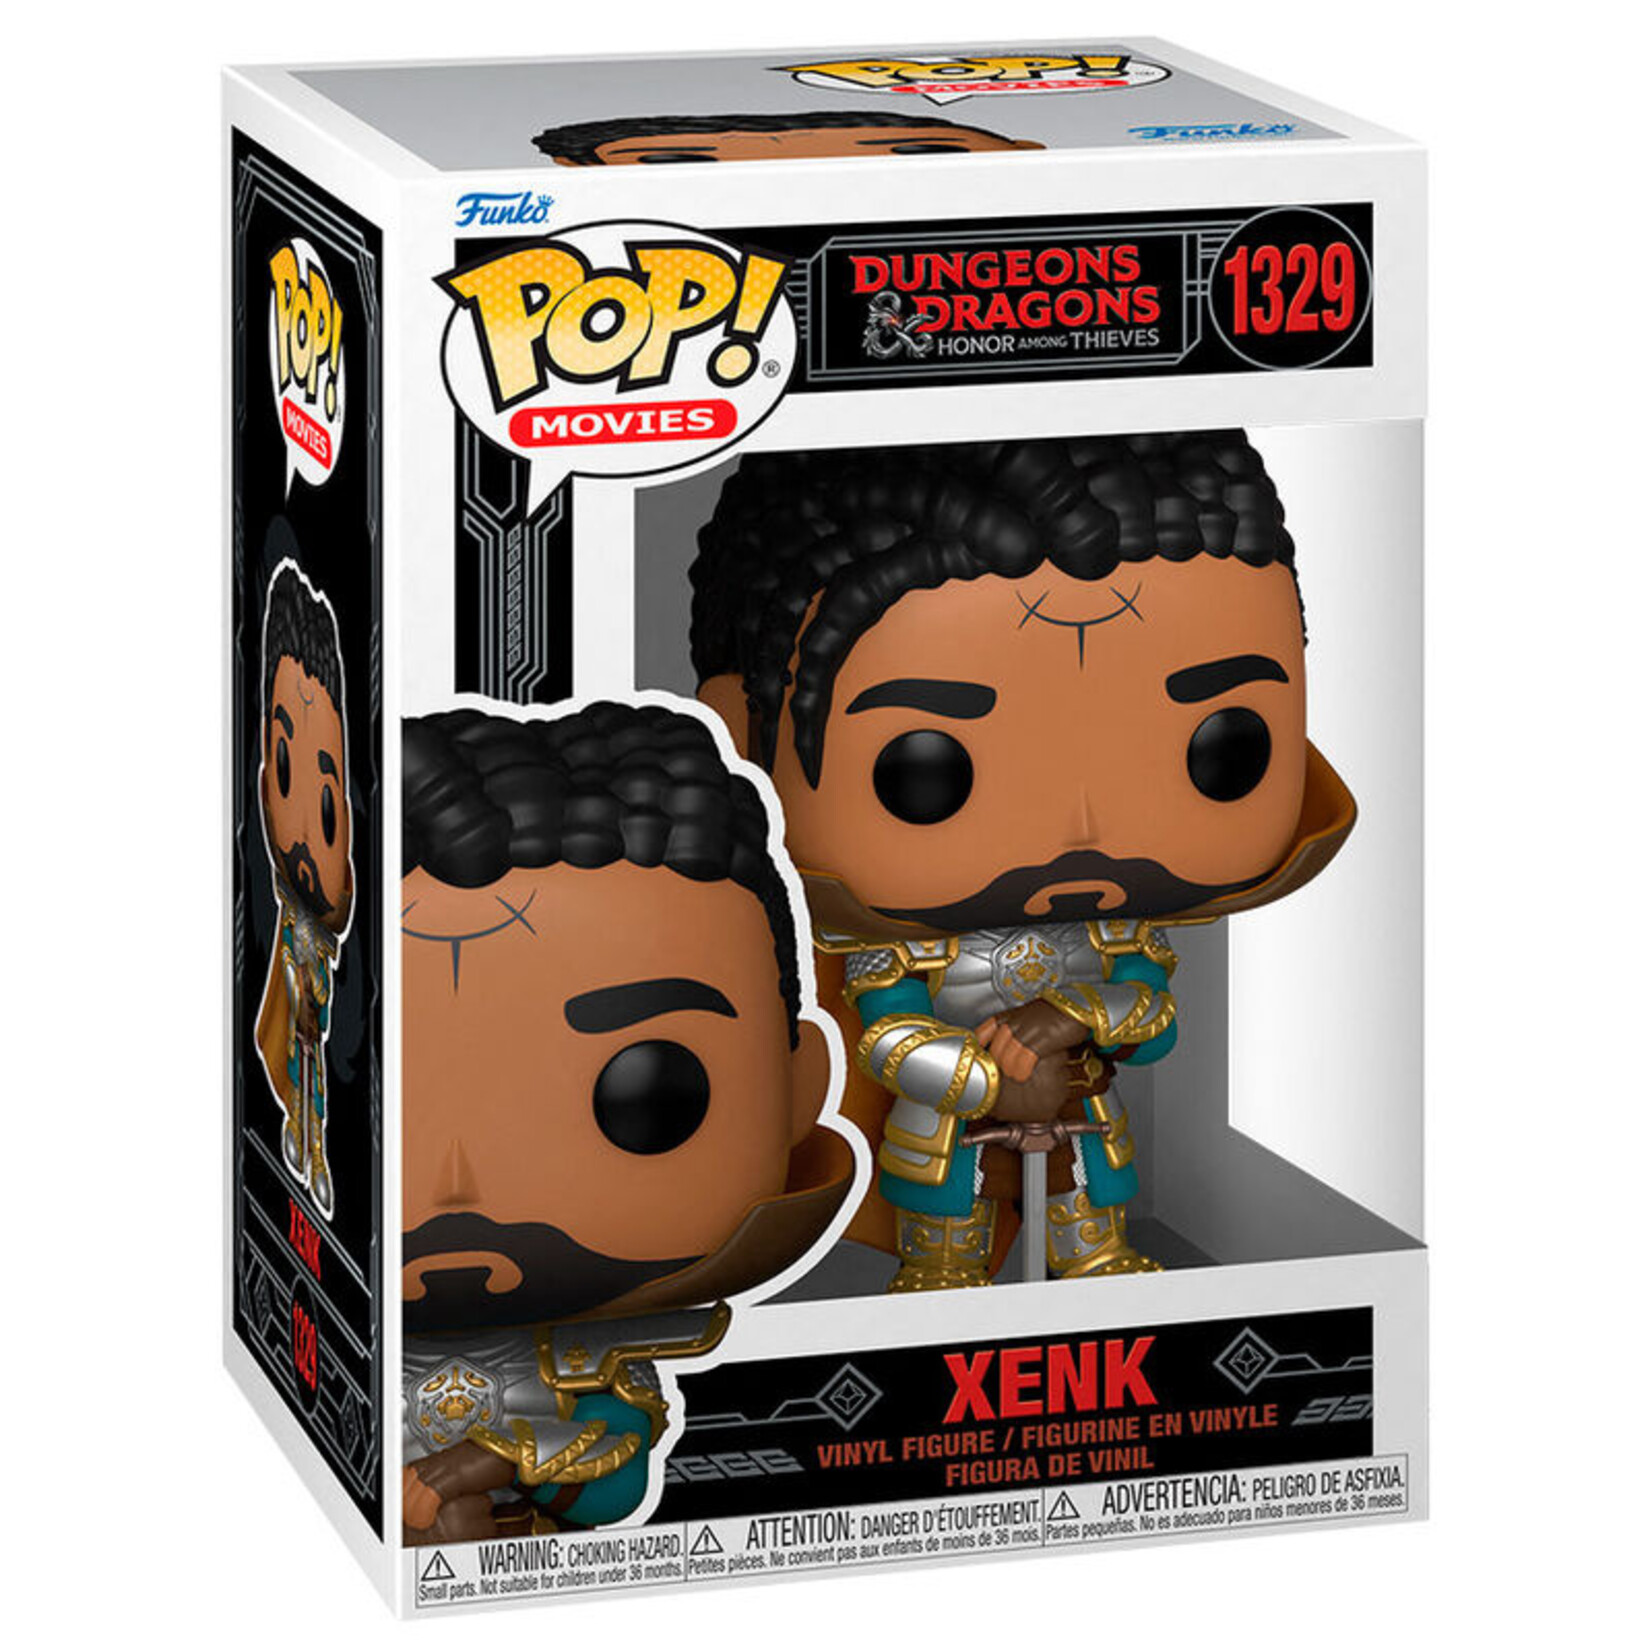 Funko Funko POP! Movies Figure Dungeons & Dragons Honor Among Thieves Xenk